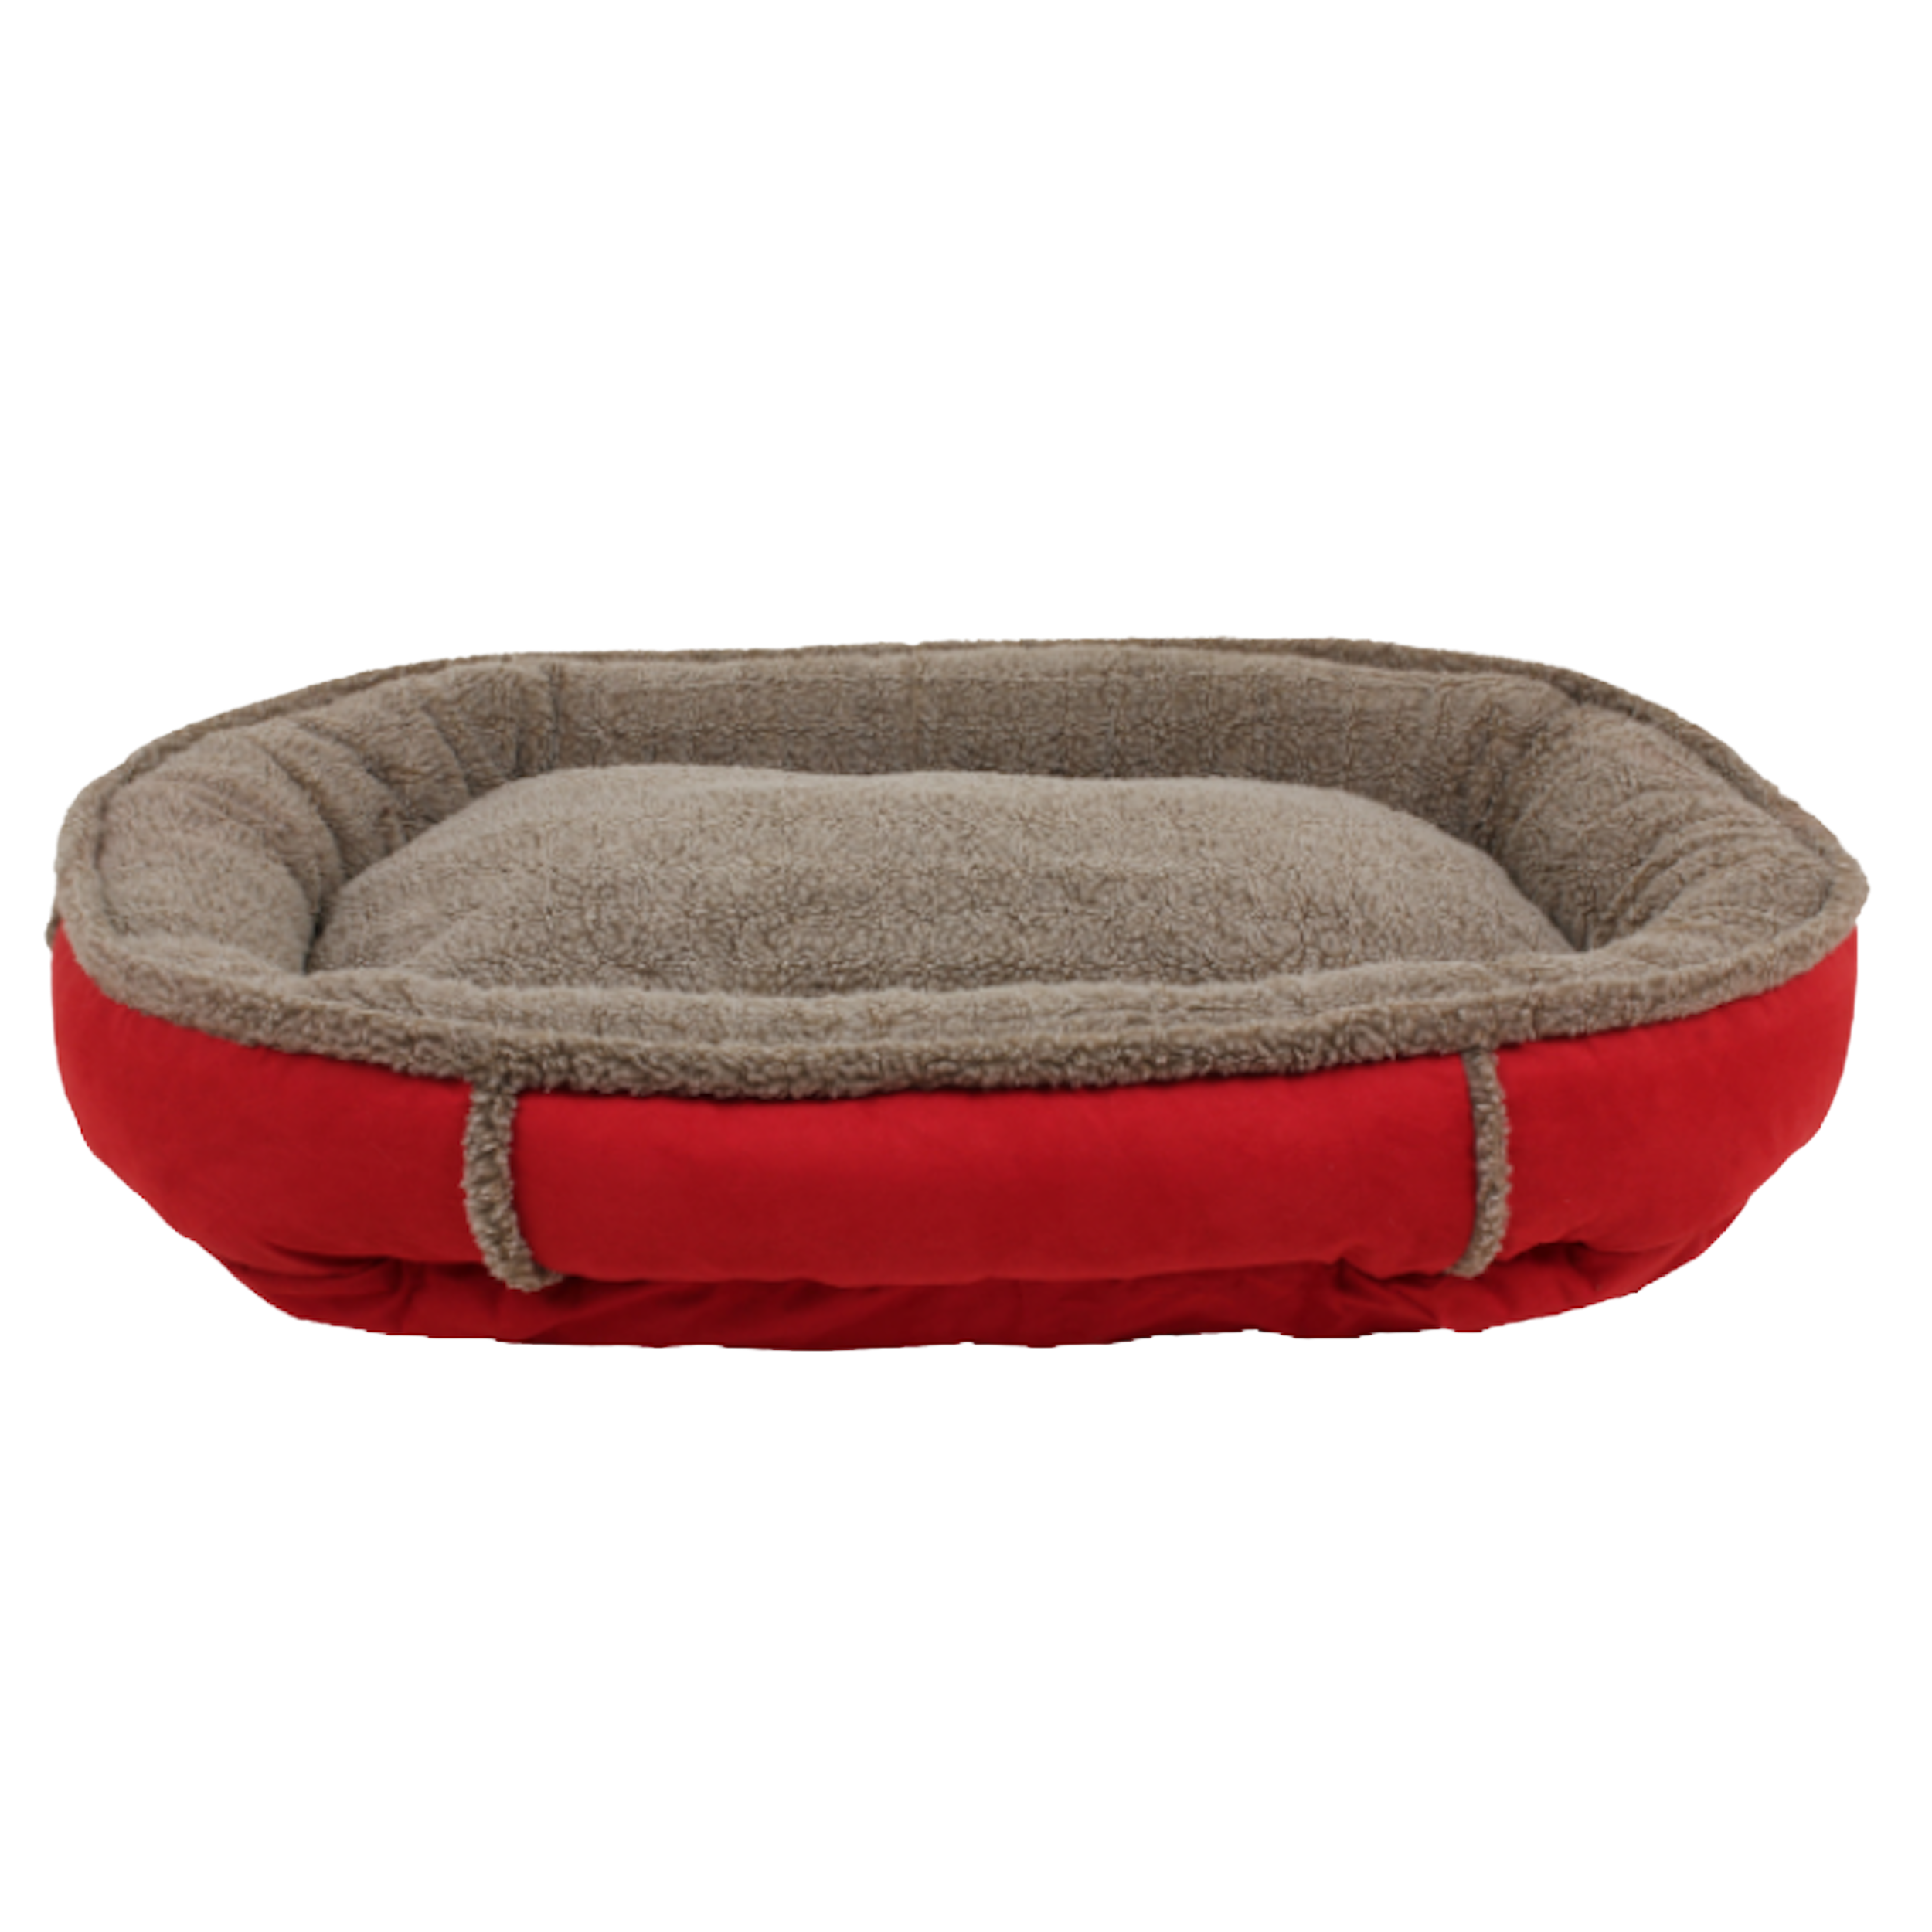 DOG-BED-ORTHO-SLEEPER-BOLSTER-ROUND-COMFY-CUP